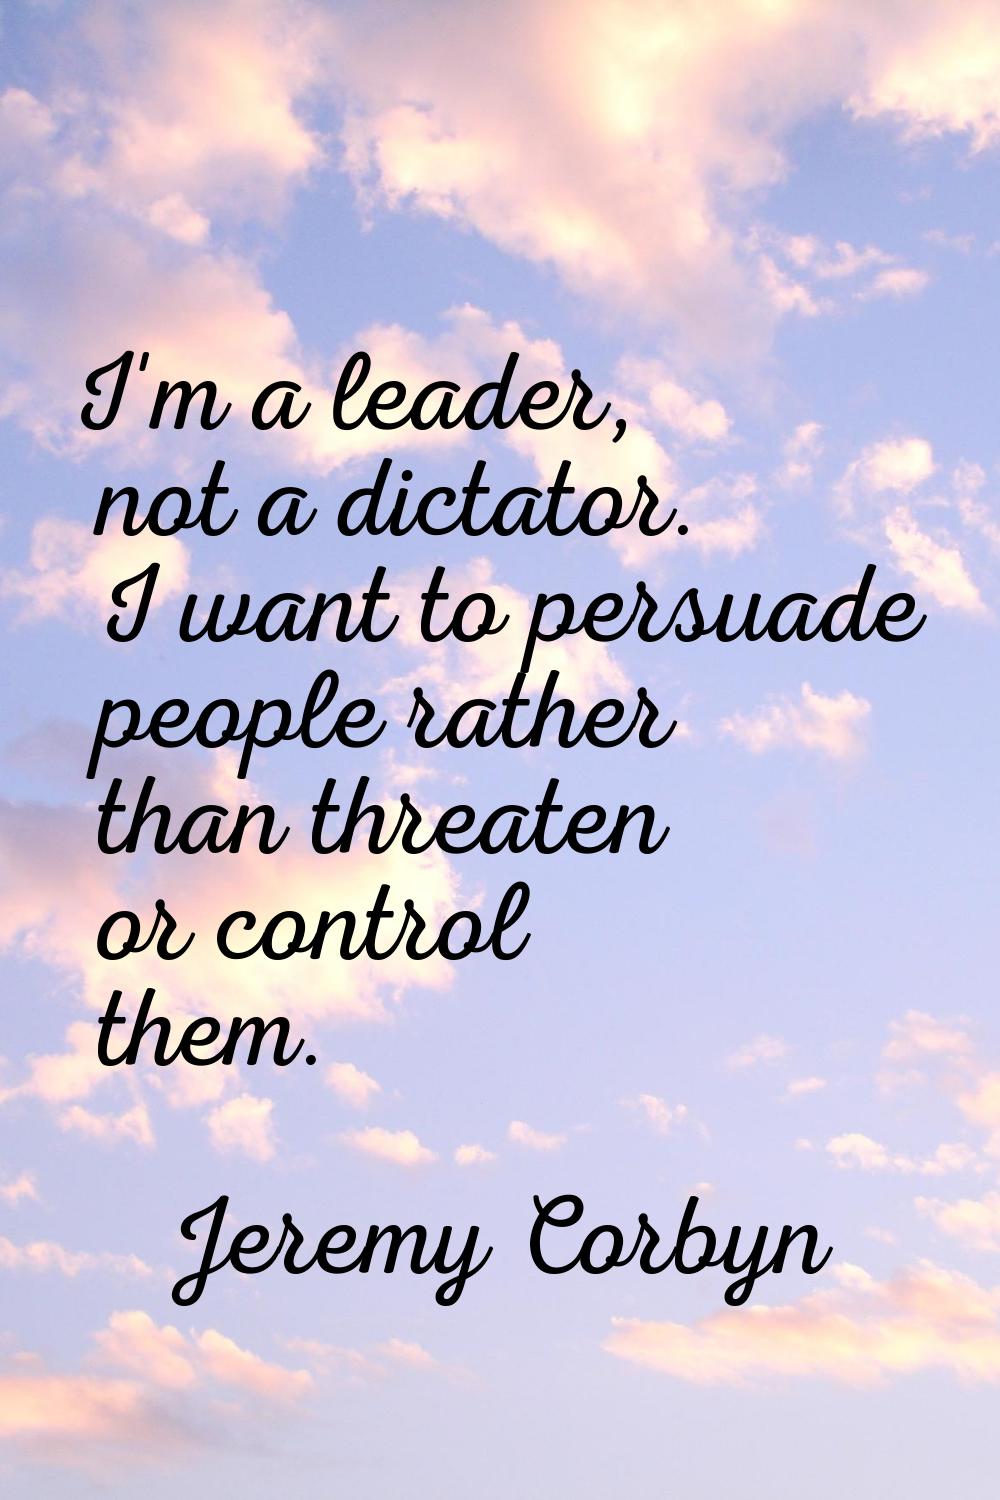 I'm a leader, not a dictator. I want to persuade people rather than threaten or control them.